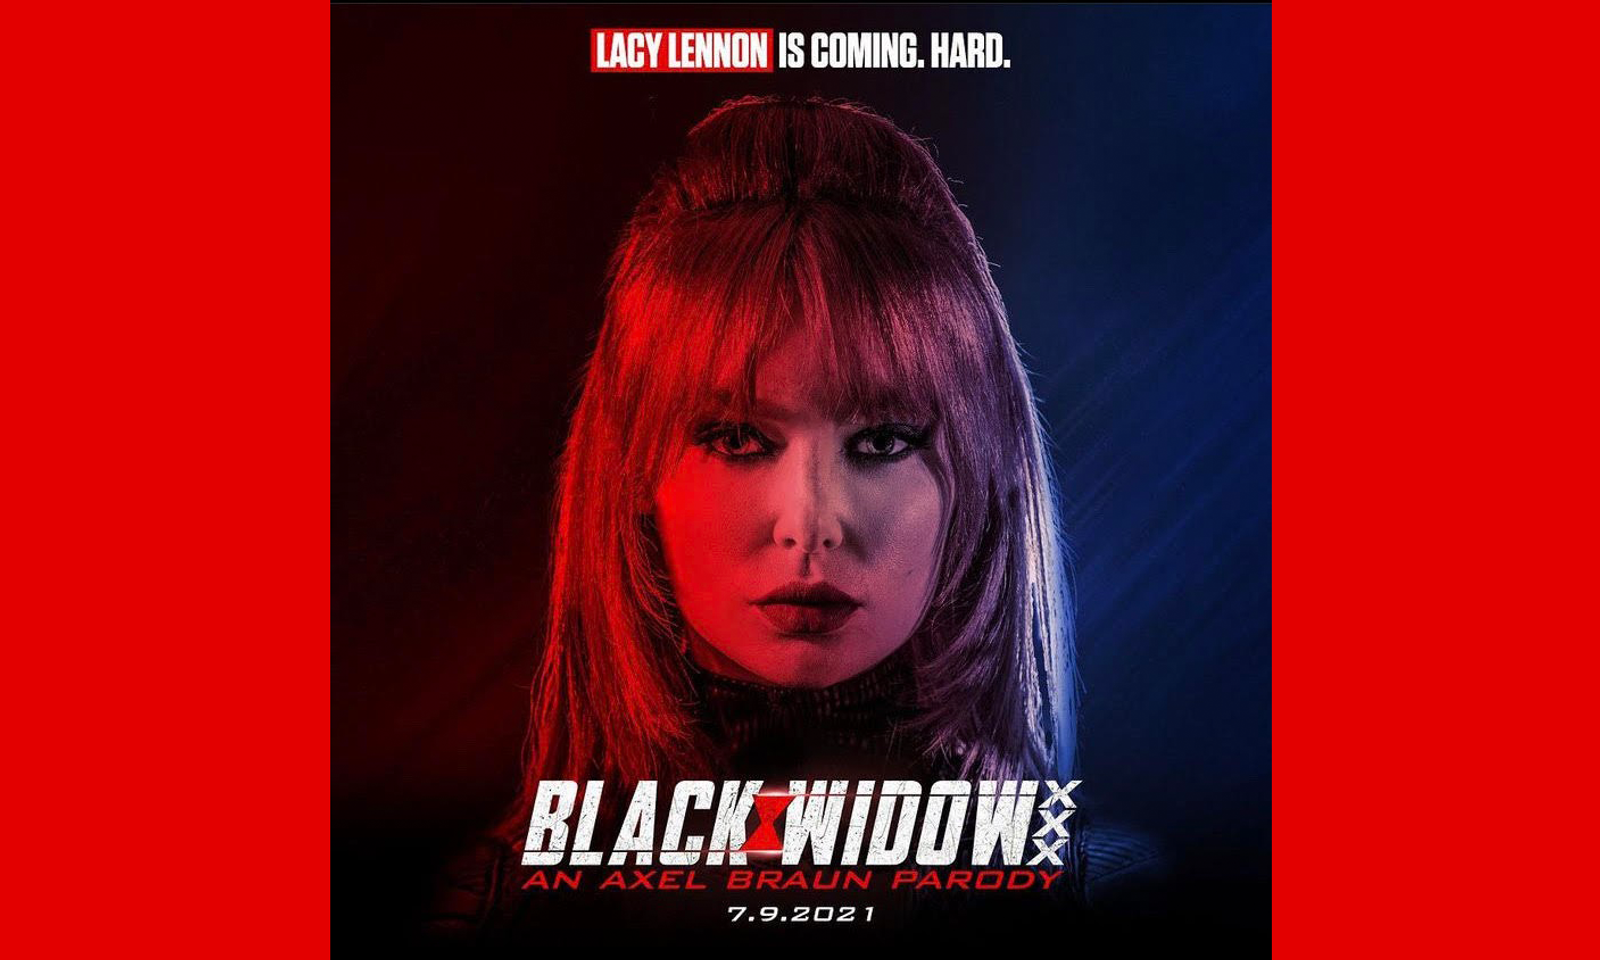 Lacy Lennon Character Reveal as Black Widow Gets Fans Buzzing